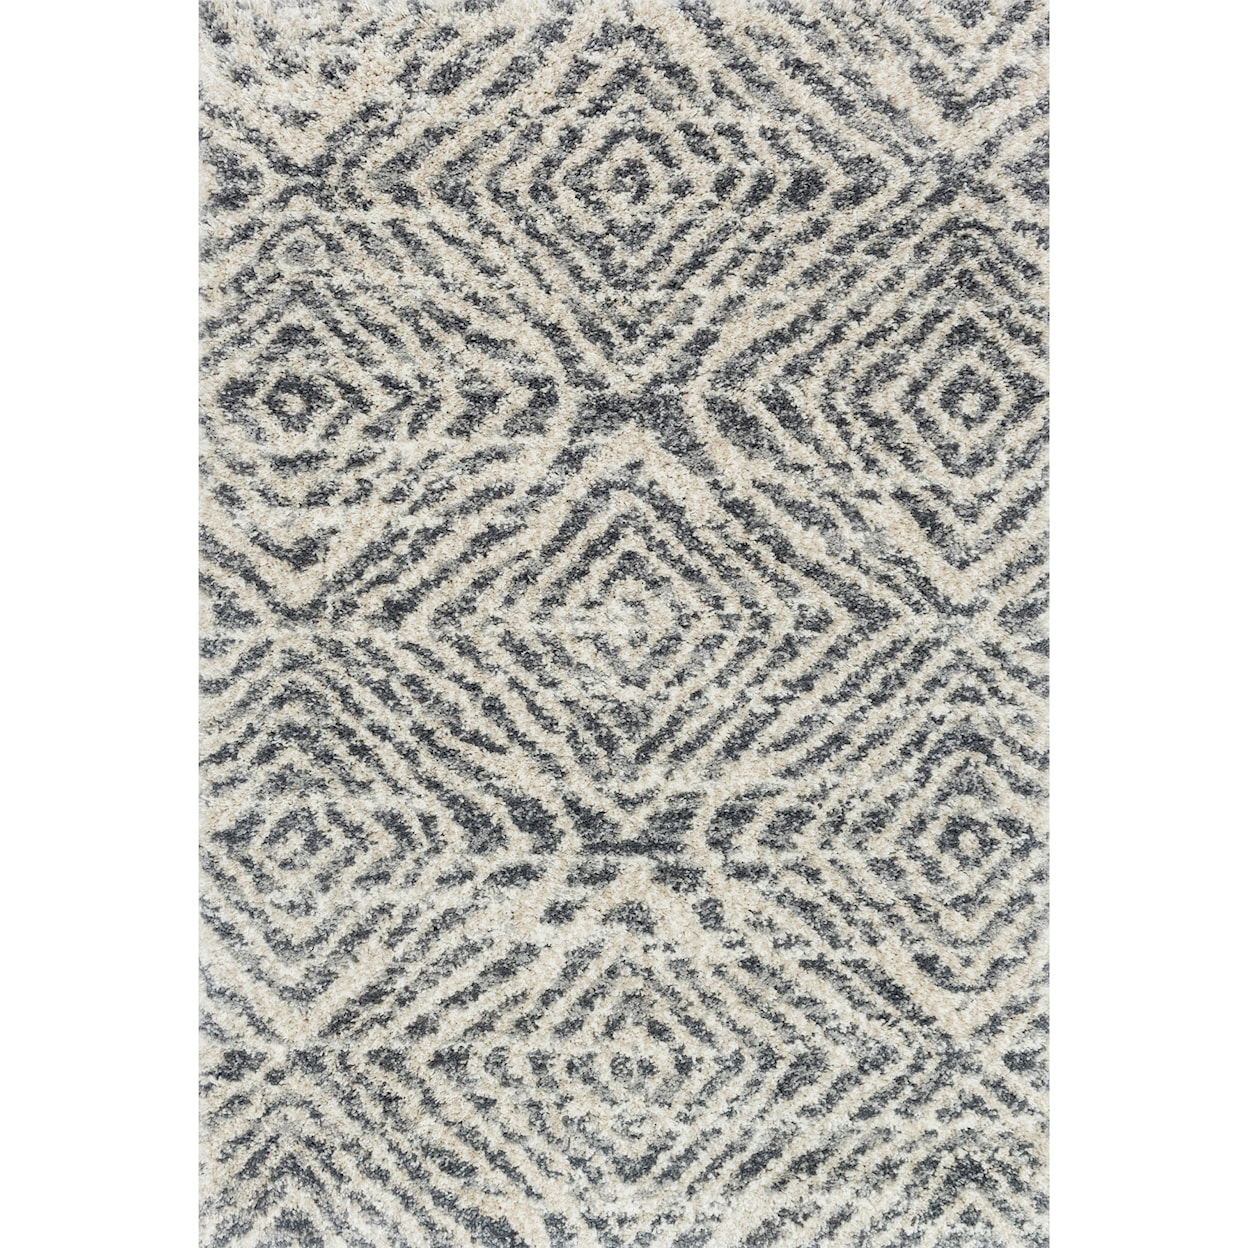 Loloi Rugs Quincy 8'10" x 12' Graphite / Sand Rug